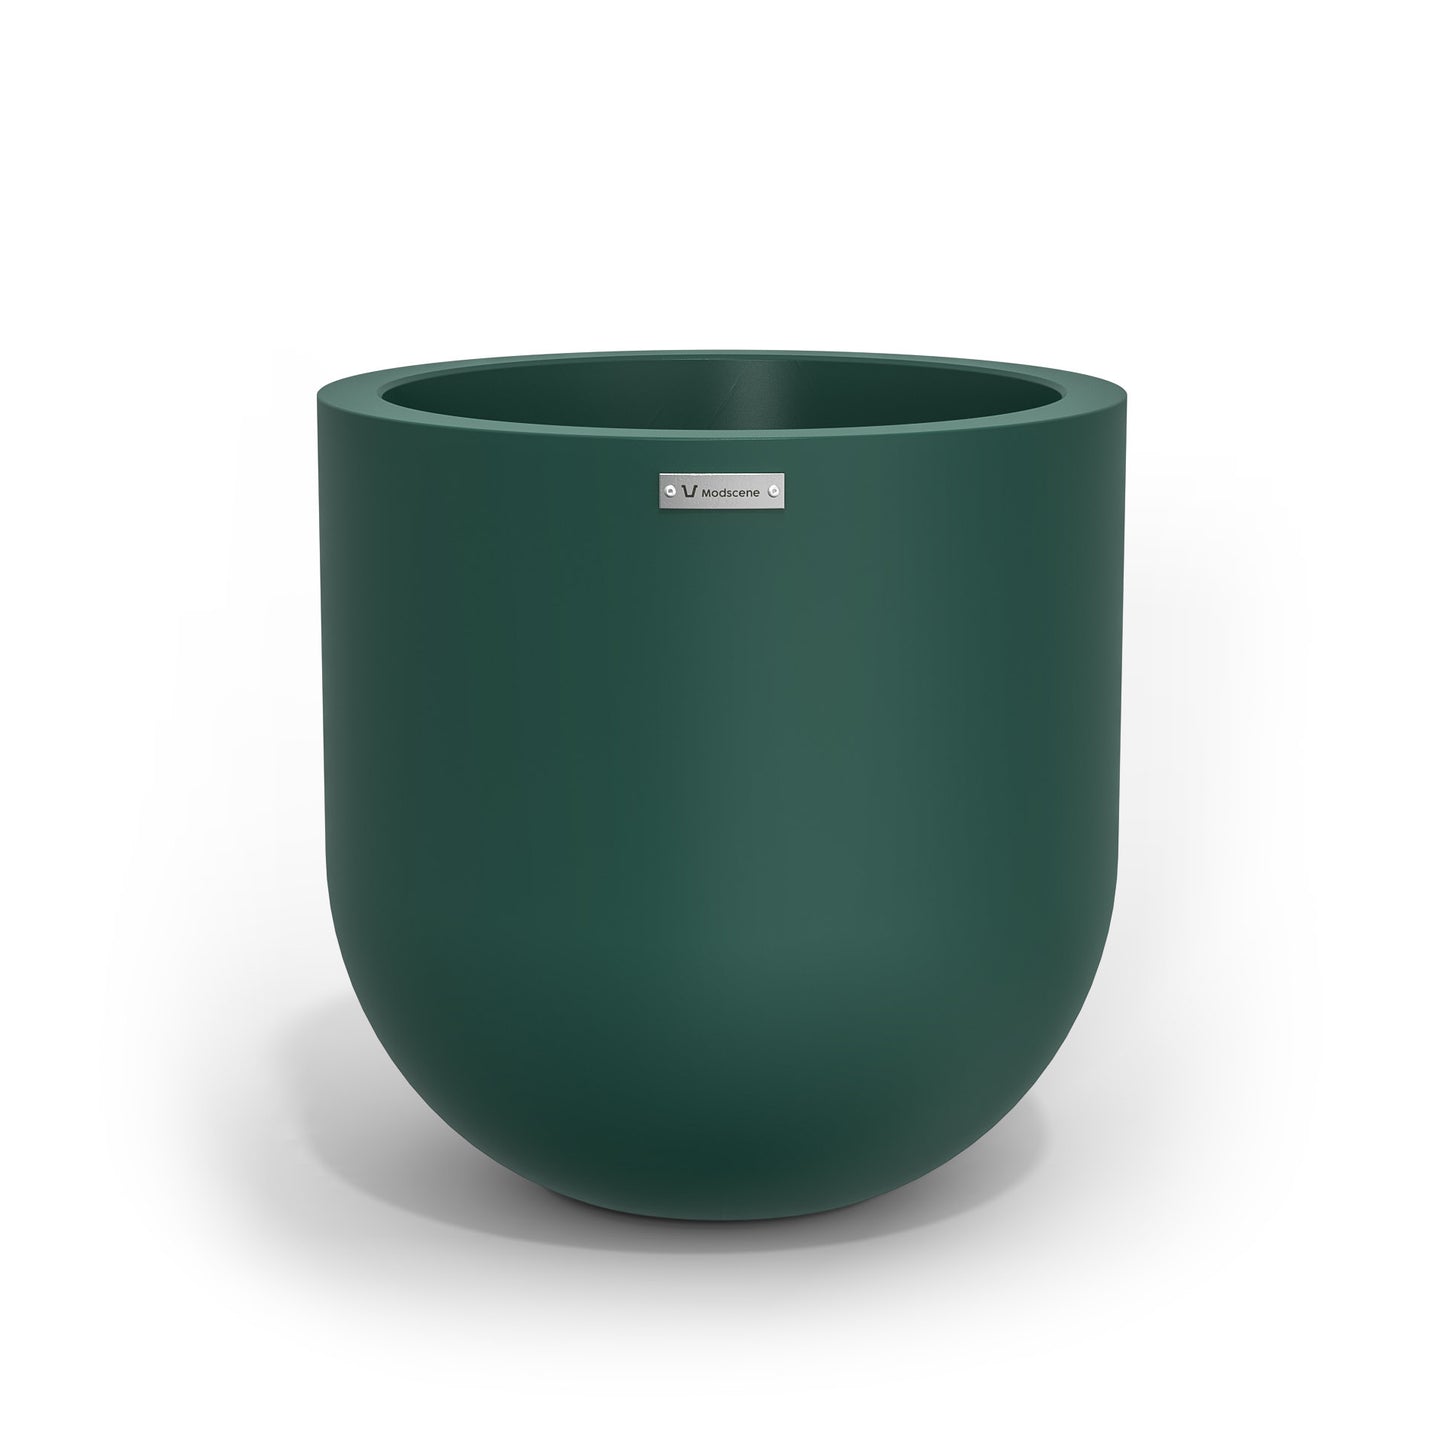 A medium sized planter pot in an emerald green colour made by Modscene.